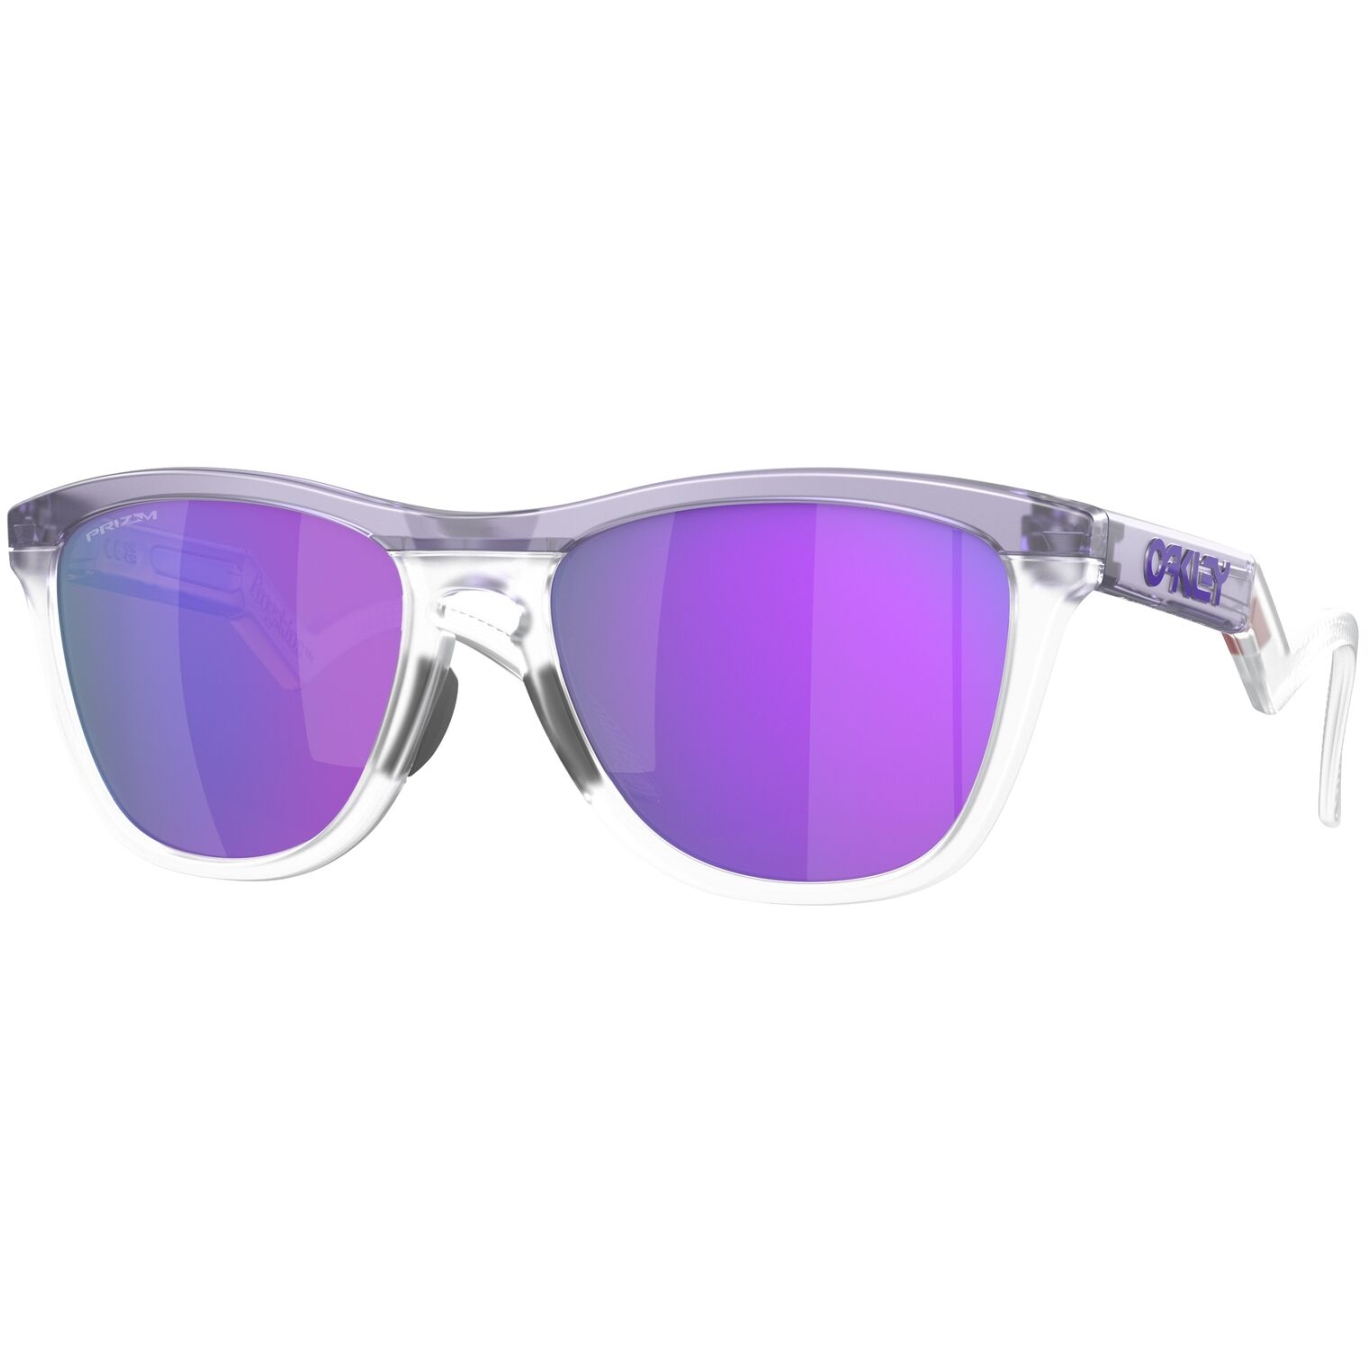 Picture of Oakley Frogskins Hybrid Glasses - Matte Trans Lilac/Clear/Prizm Violet - OO9289-928901